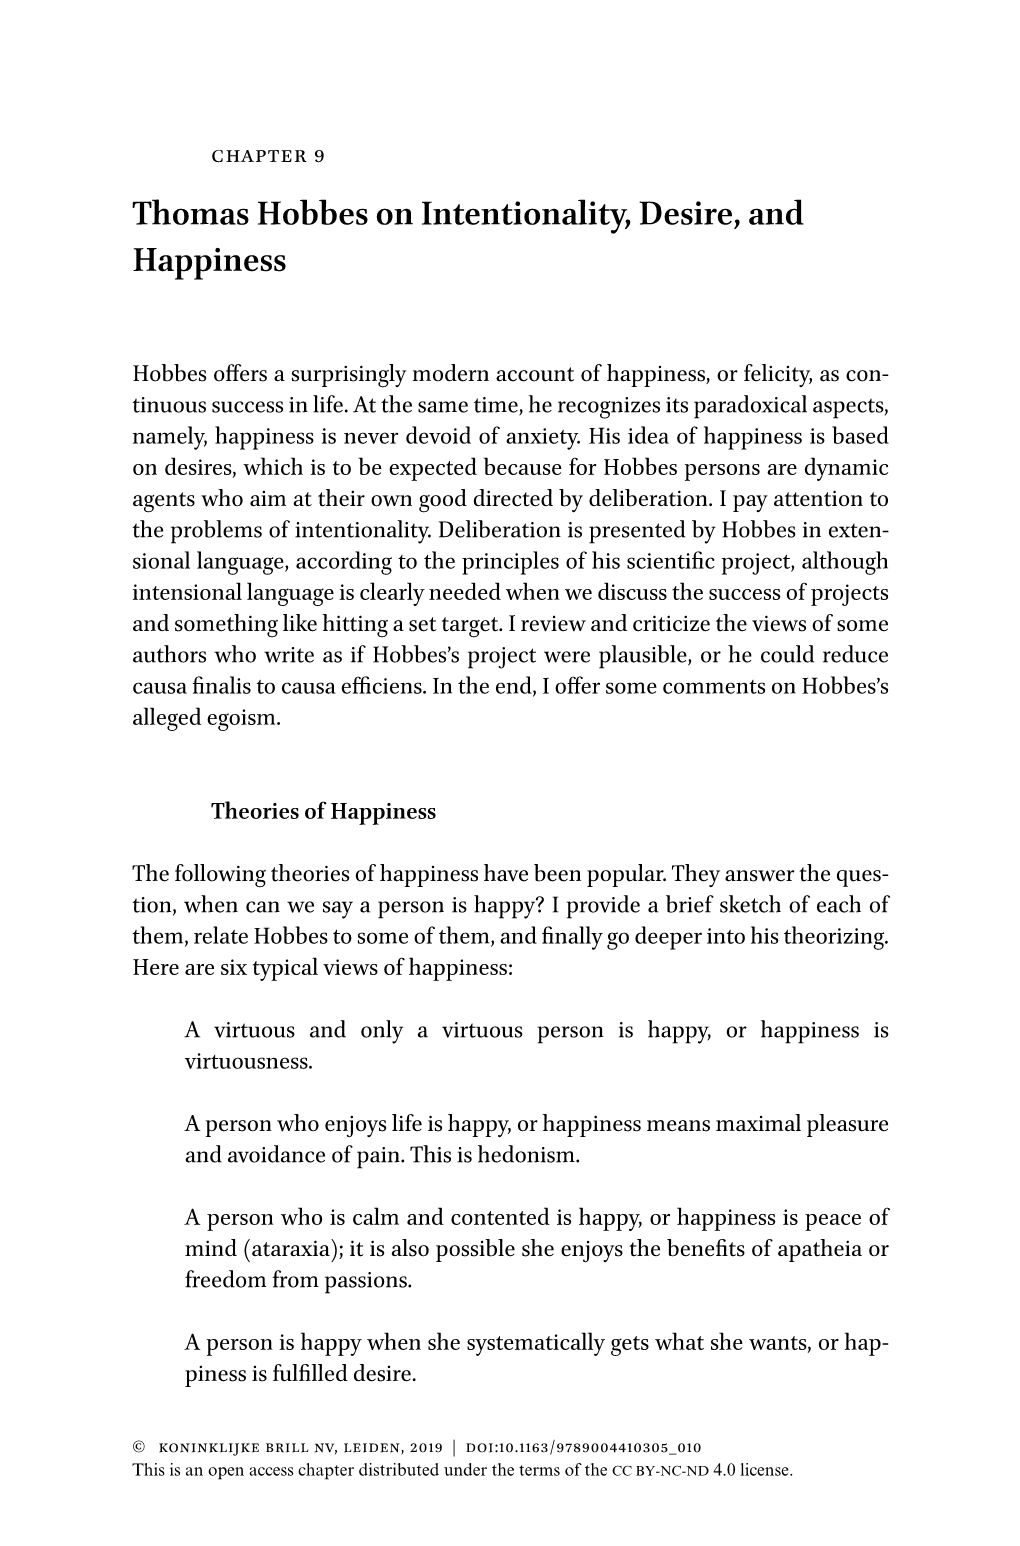 Thomas Hobbes on Intentionality, Desire, and Happiness